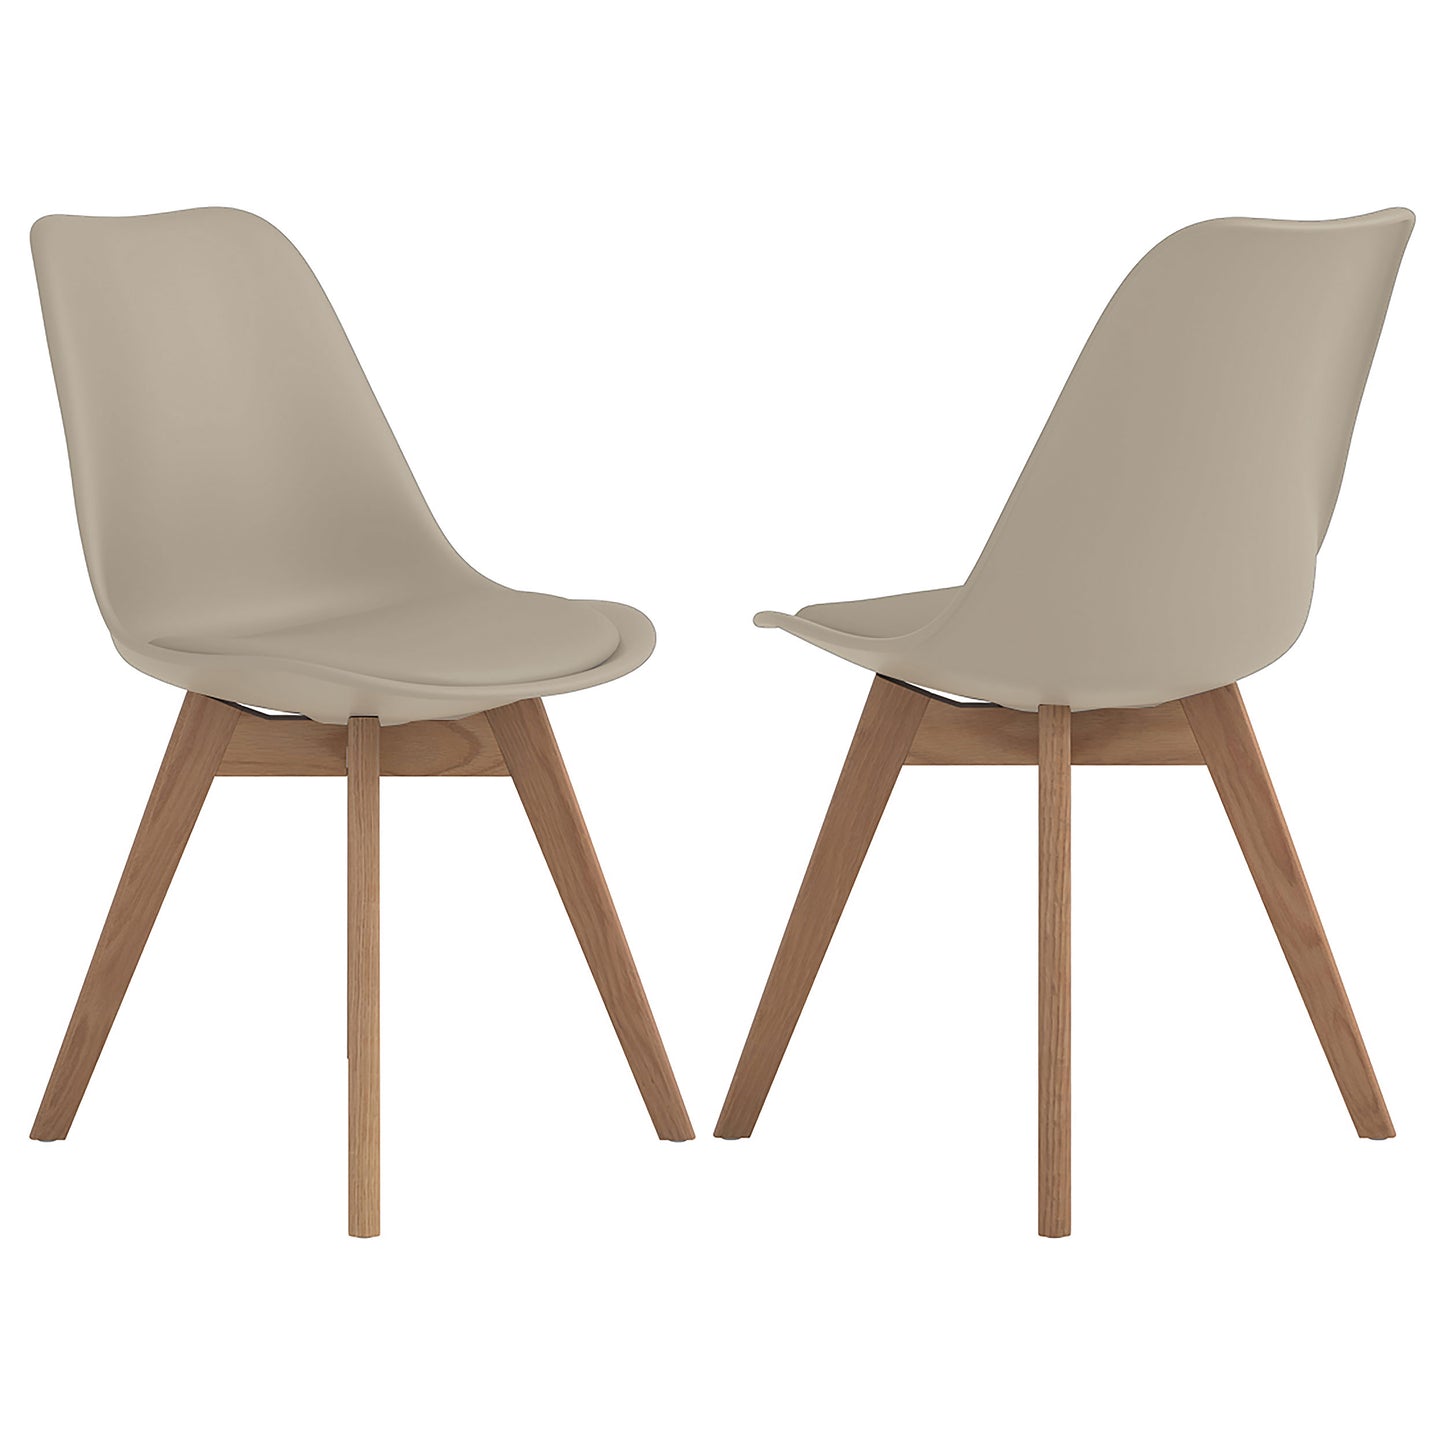 Caballo Upholstered Side Chairs Tan (Set of 2)